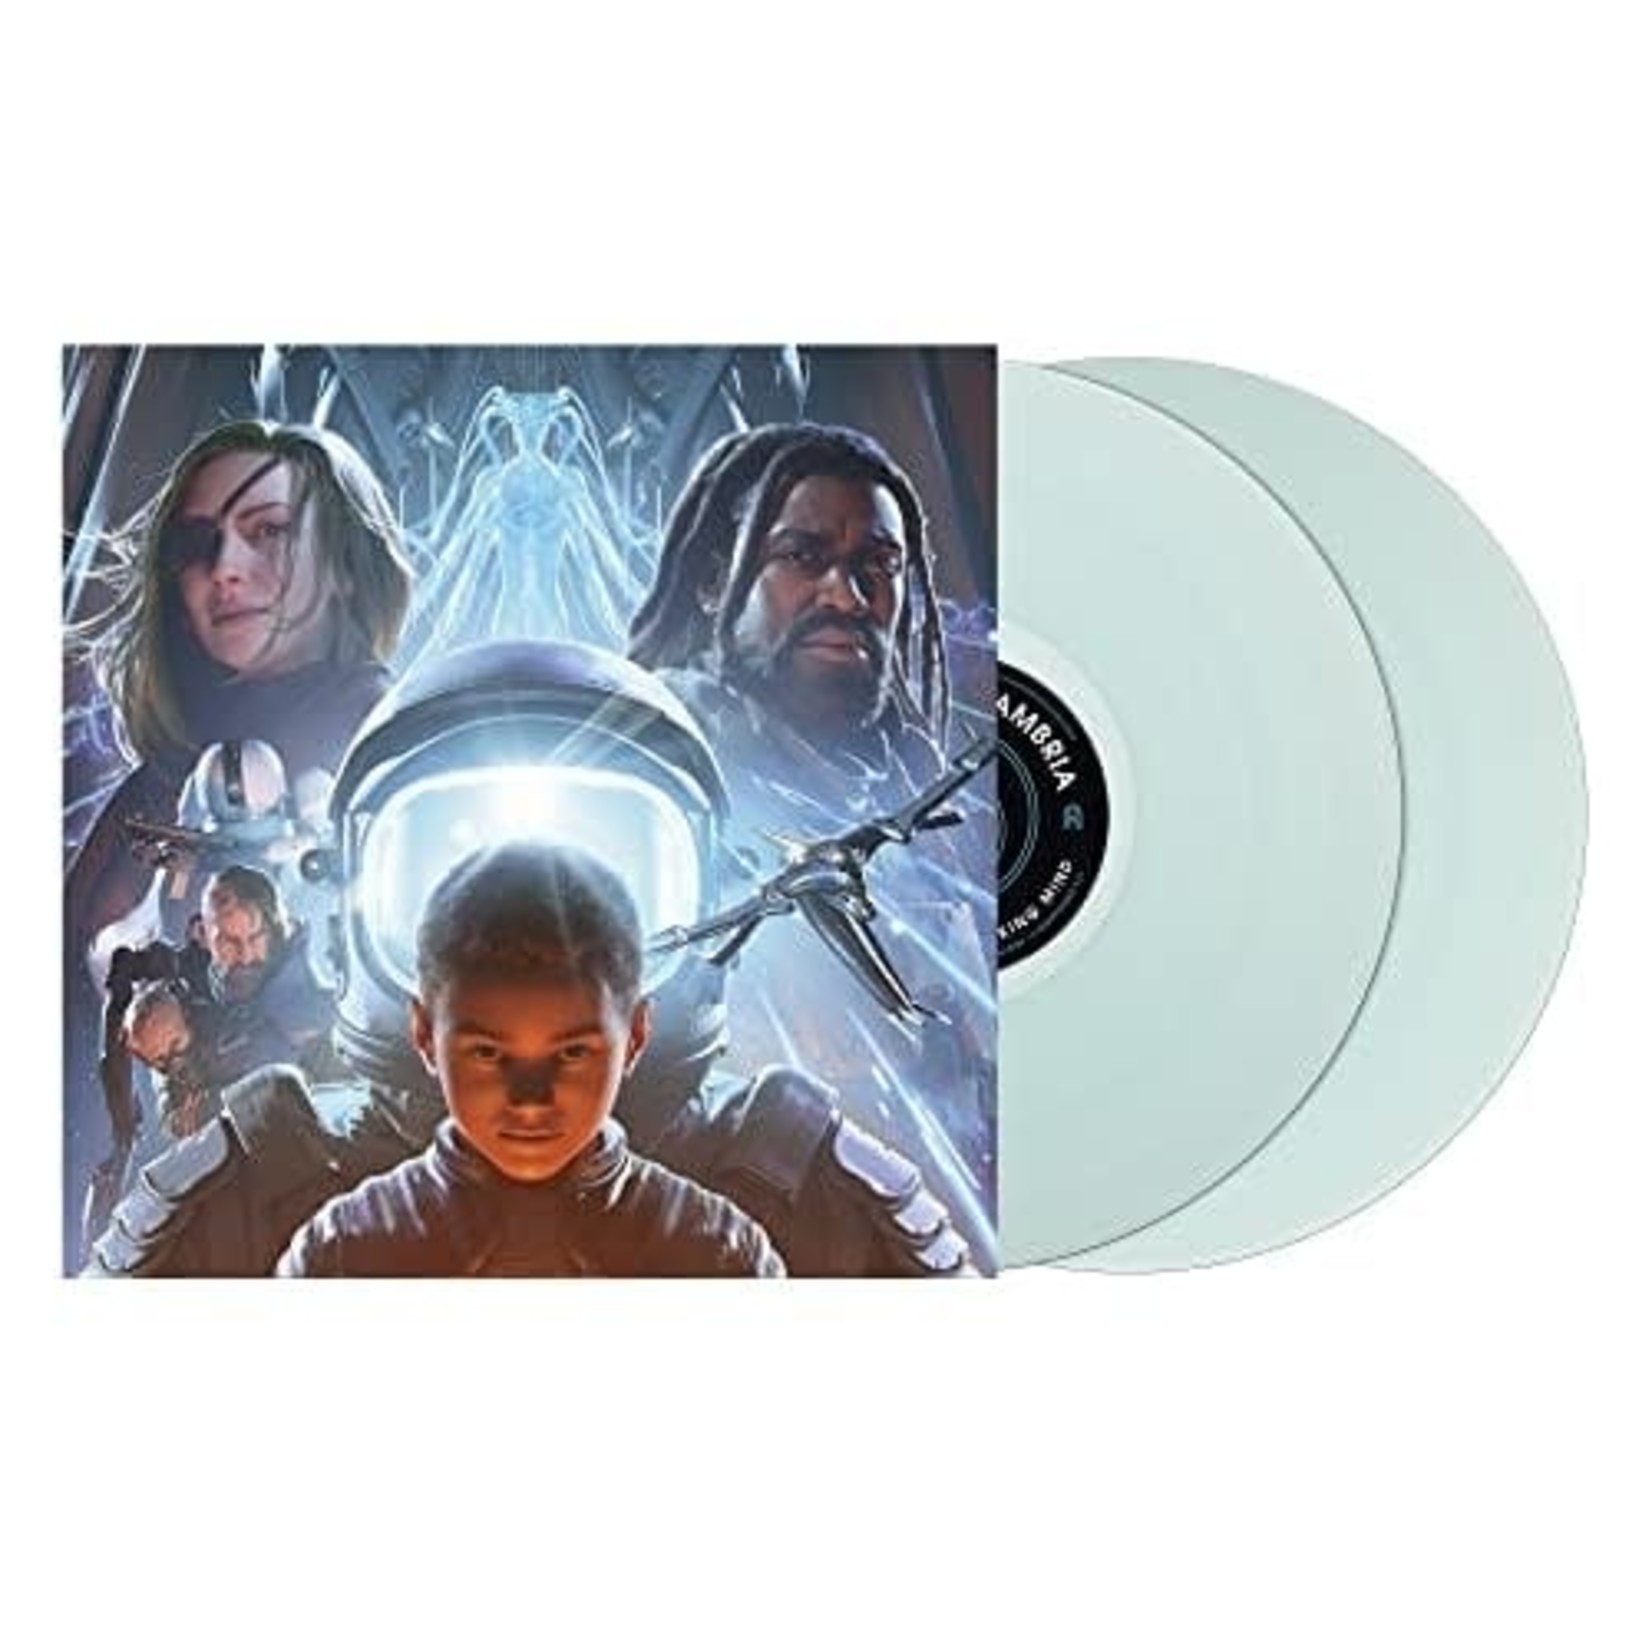 [New] Coheed And Cambria: Vaxis II: A Window Of The Waking Mind (2LP/colored) [ROADRUNNER]